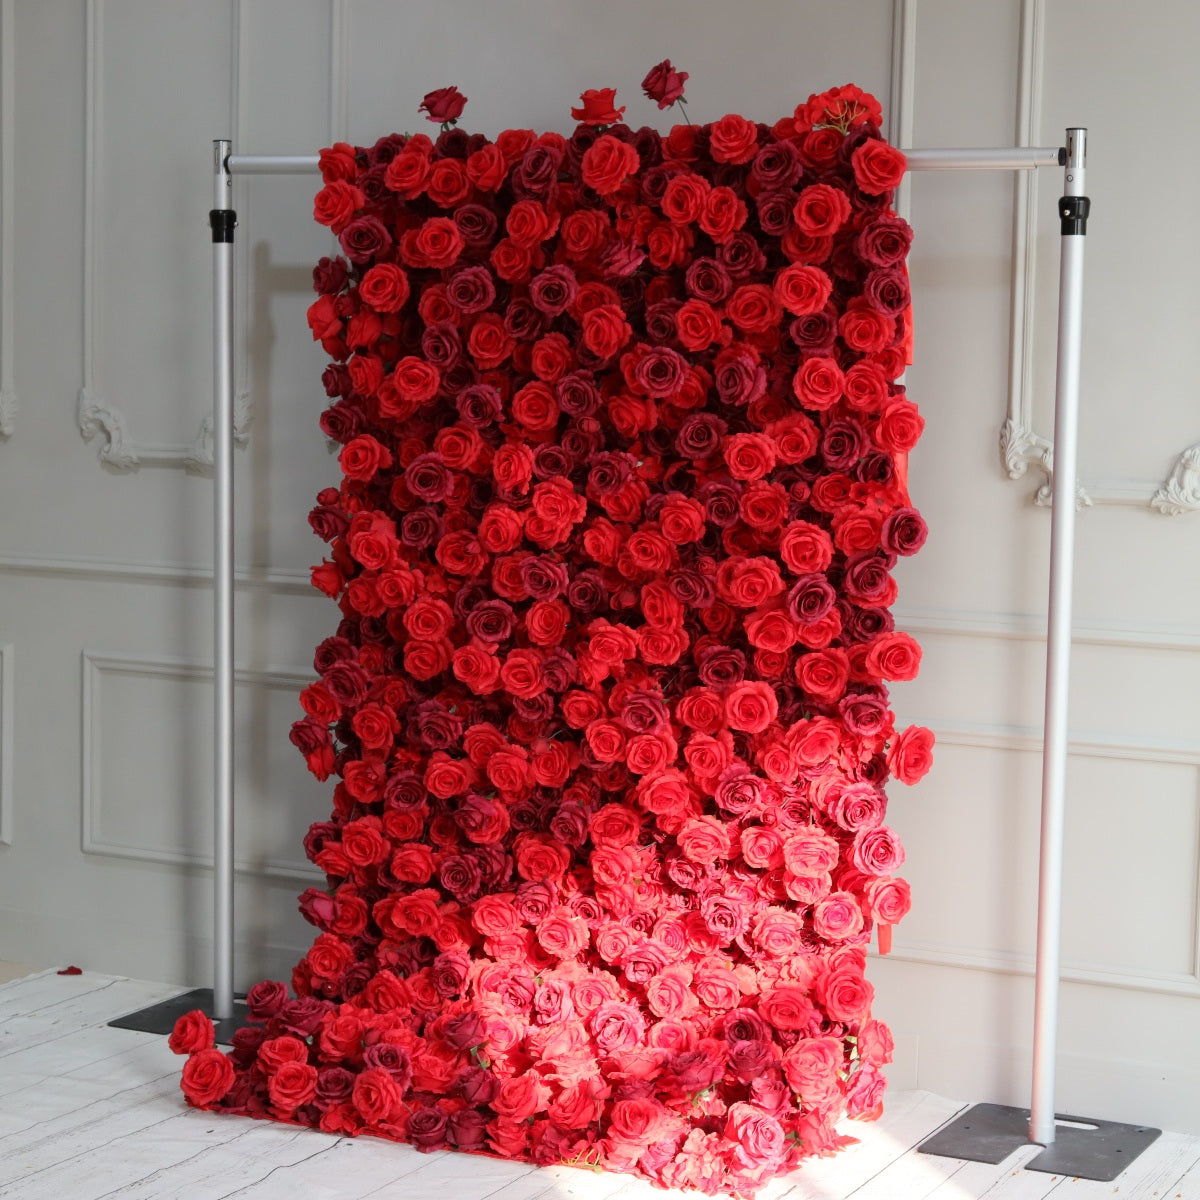 Flower Wall Red and Wine Red Rose Fabric Rolling Up Curtain Floral Backdrop Wedding Party Proposal Decor